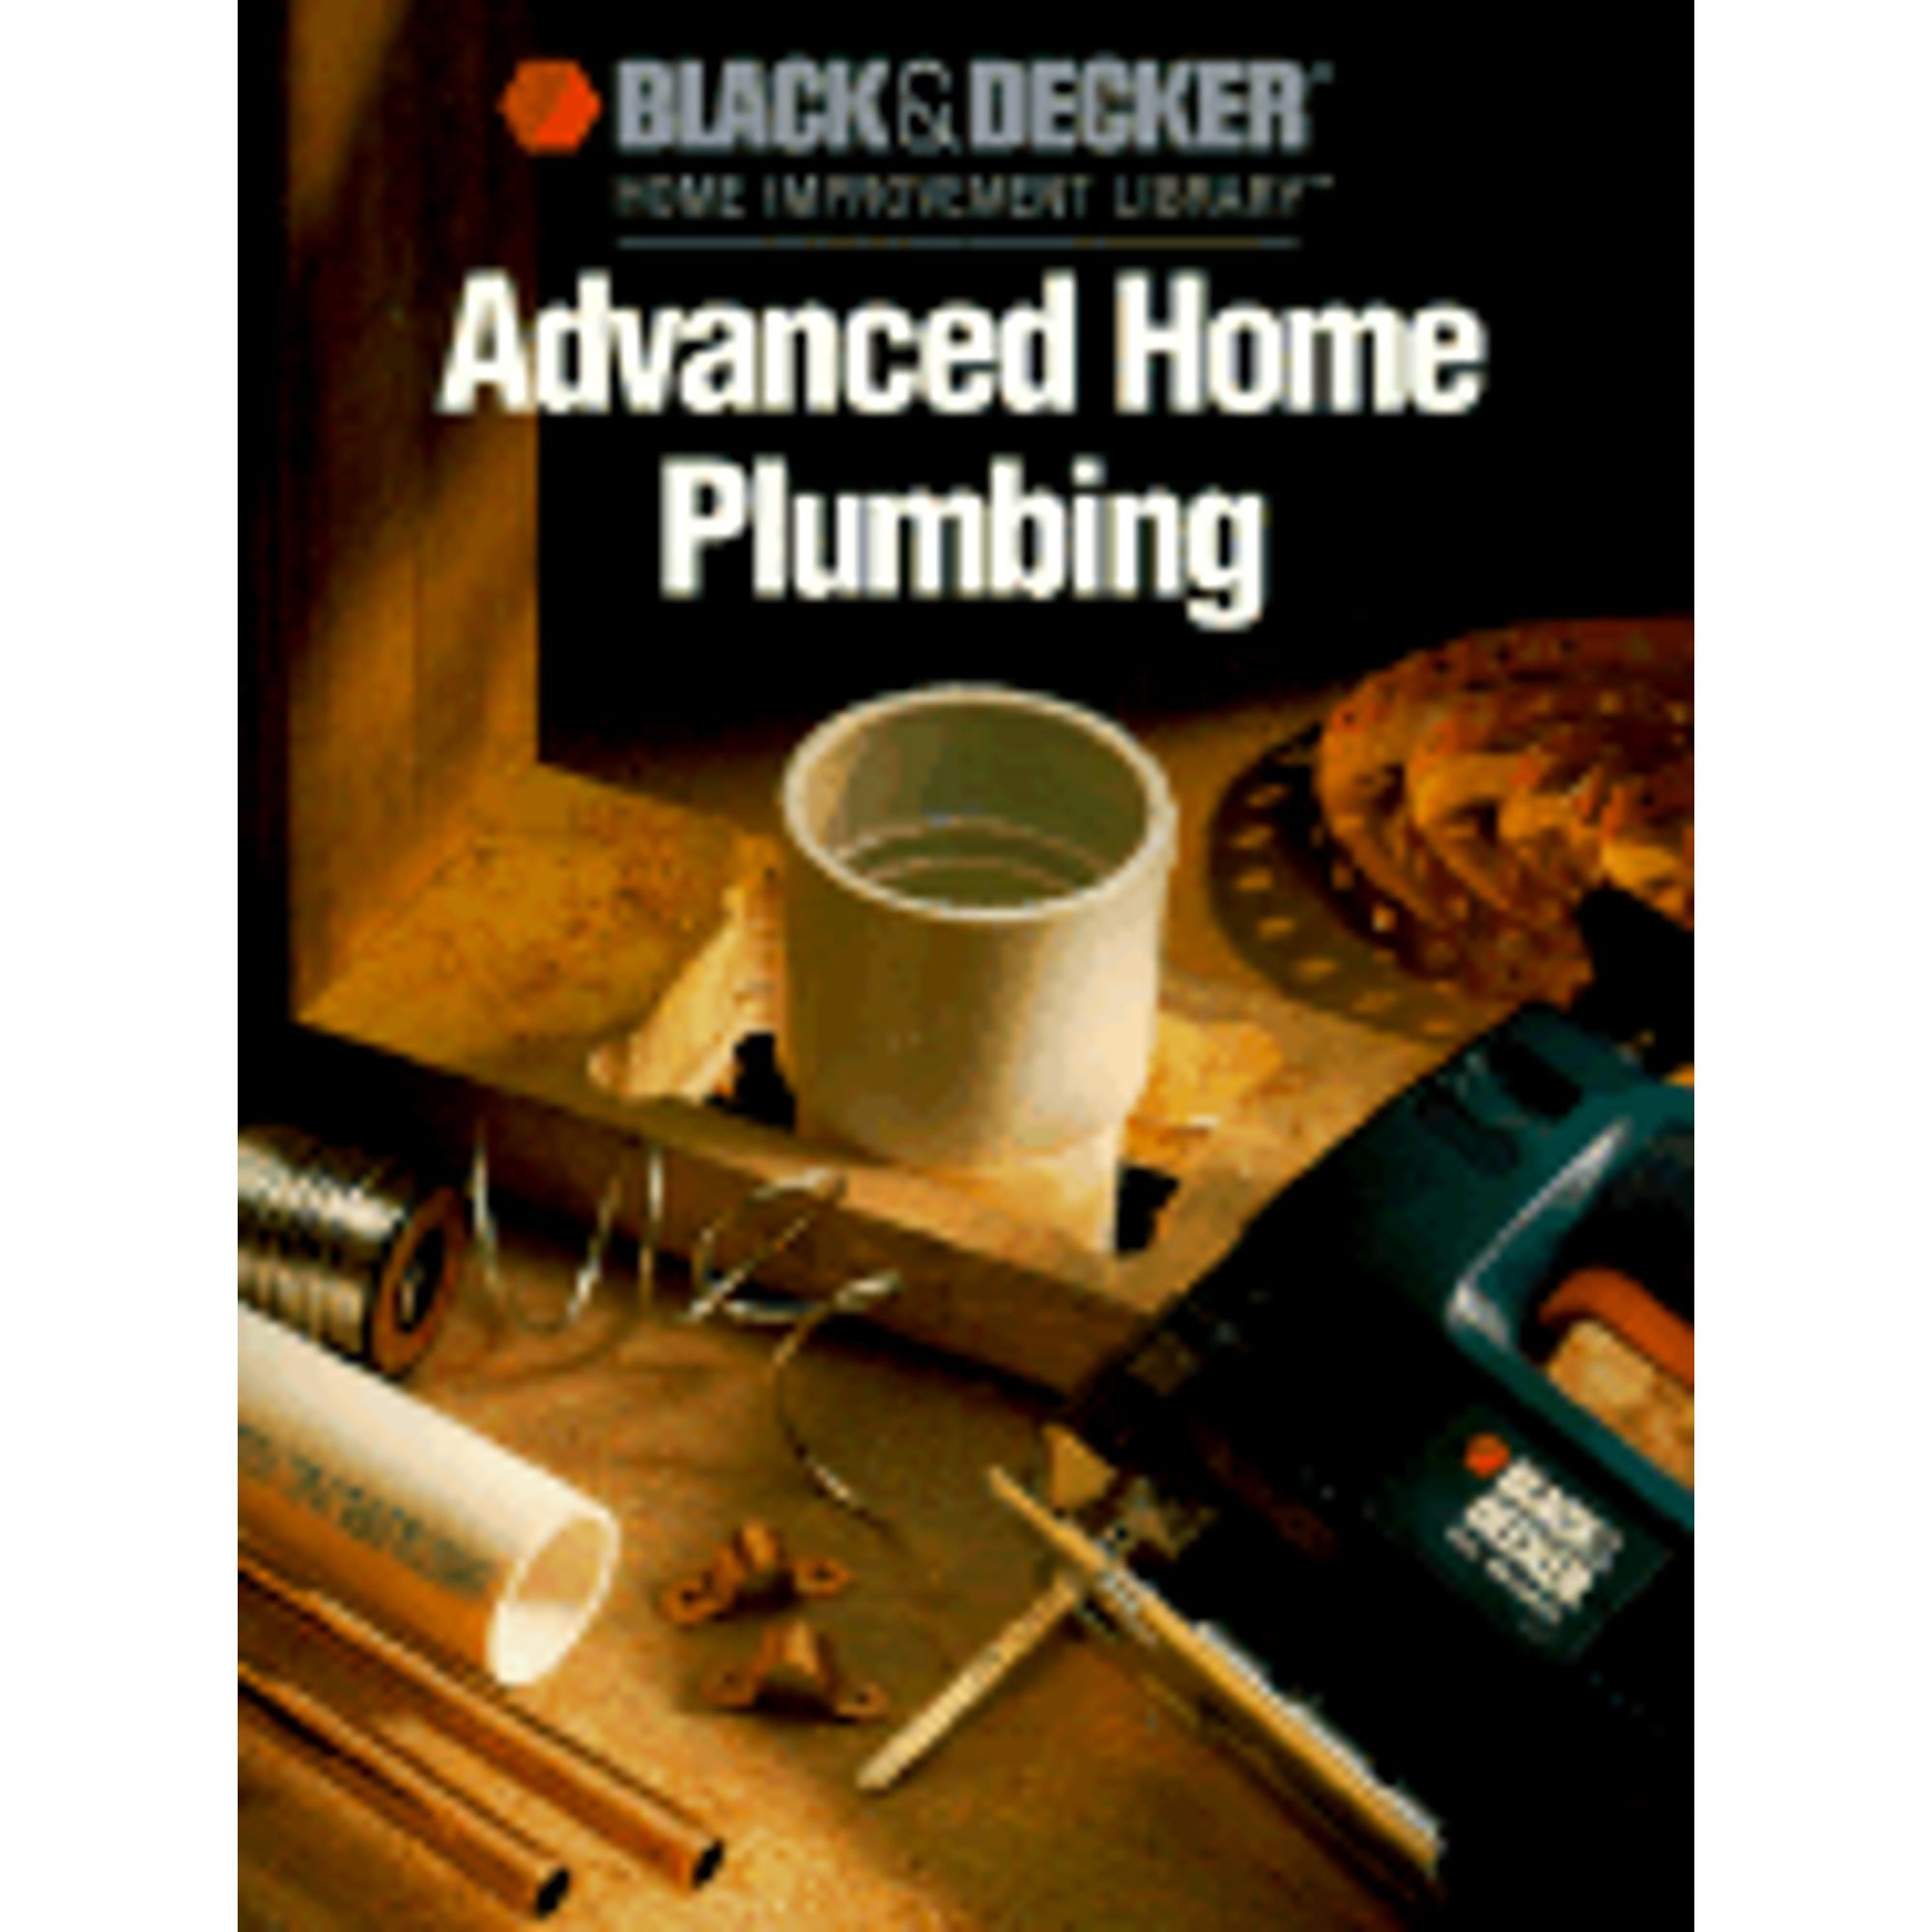 Black and Decker Advanced Home Plumbing: Hundreds of Step-by-step Photos